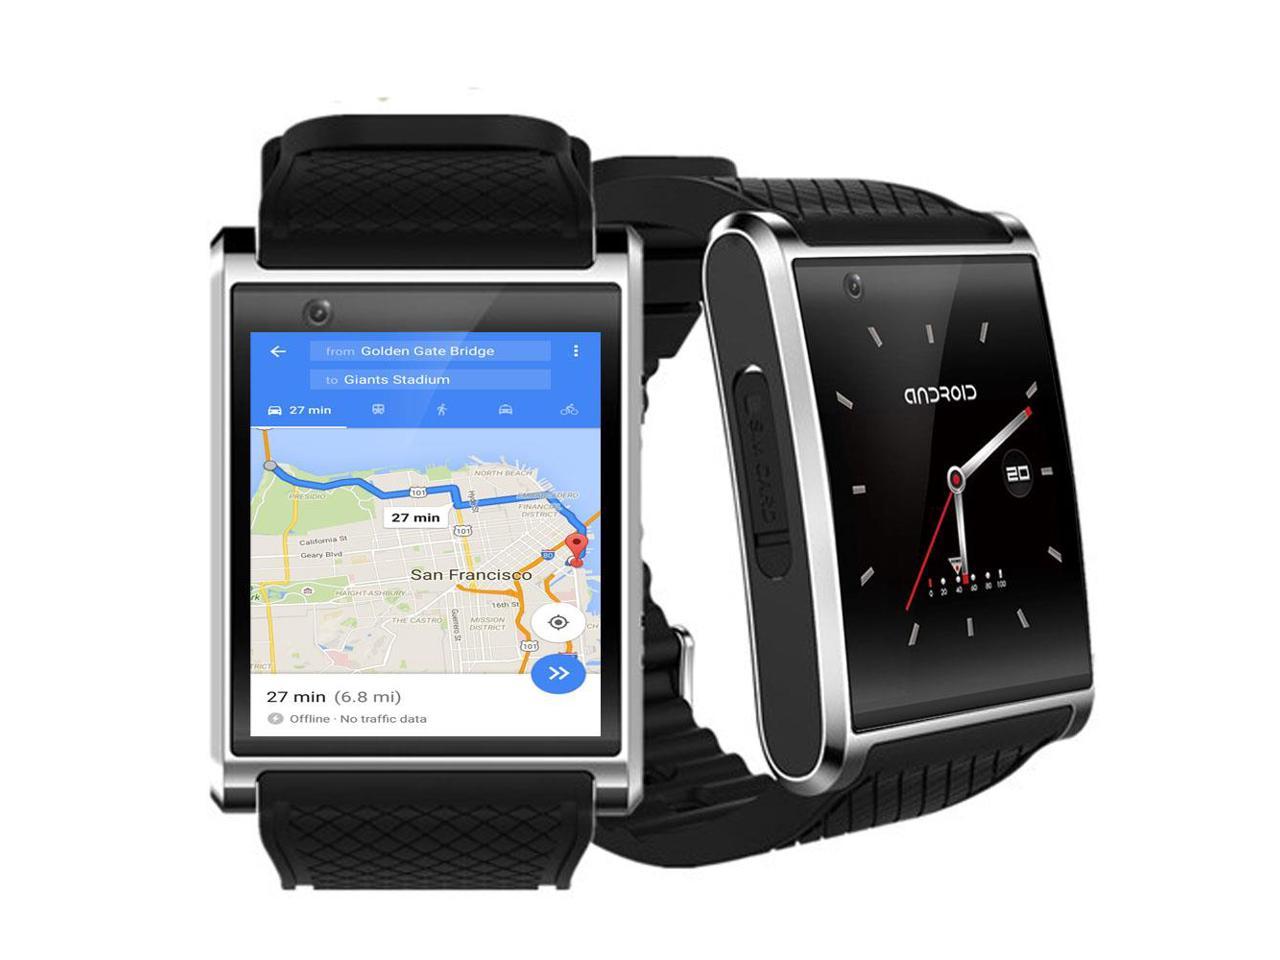 Bluetooth 4.2 Sync Android 5.1 SmartWatch (1.54-inch AMOLED Screen + QuadCore CPU + Google Play Store + WiFi)